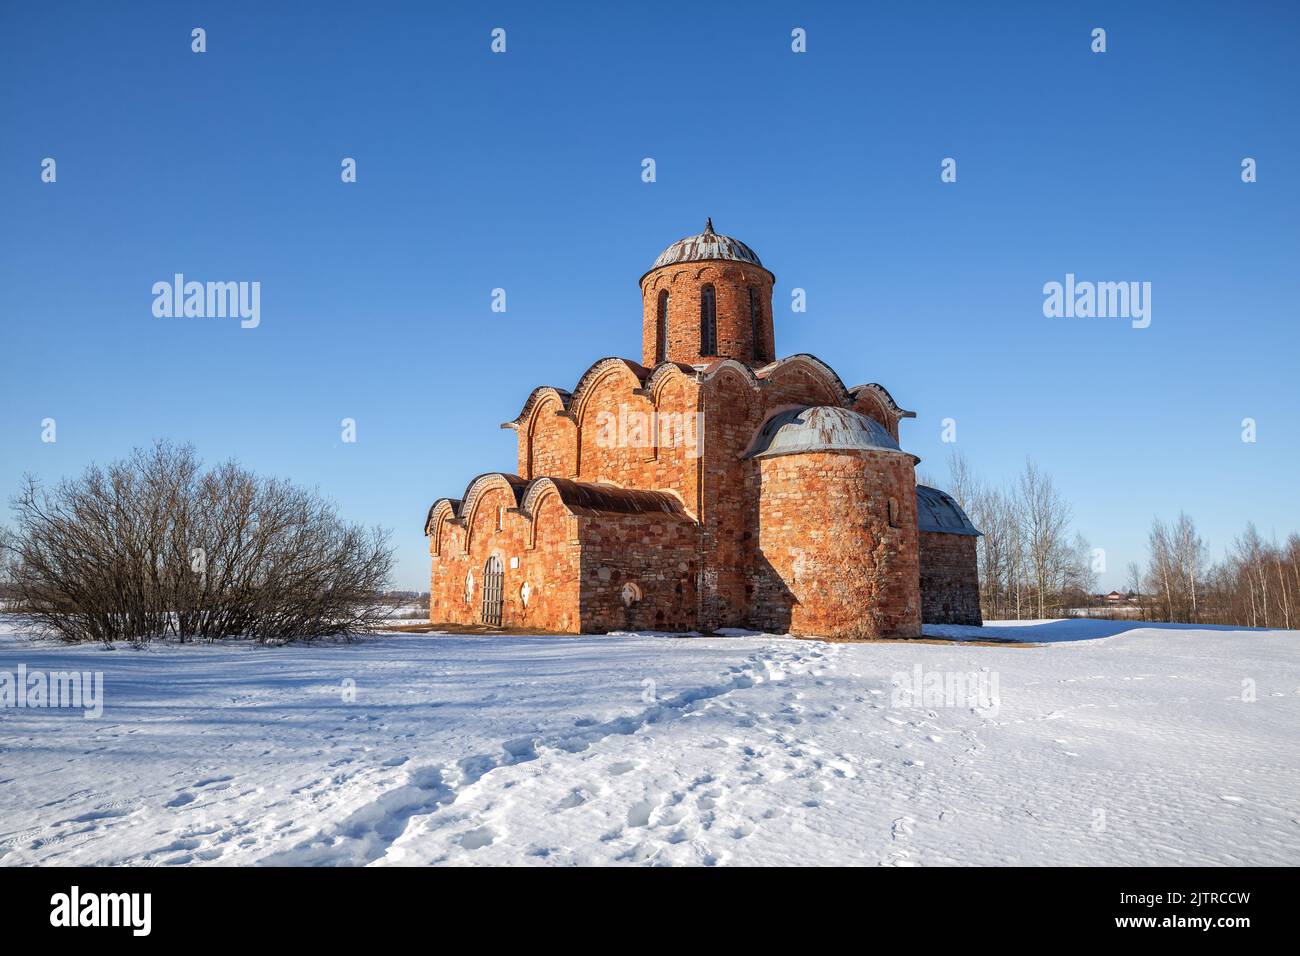 Church of the Transfiguration on Kovalevo in Veliky Novgorod vicinity, Russia. Winter countryside landscape with ancient orthodox temple made of red b Stock Photo